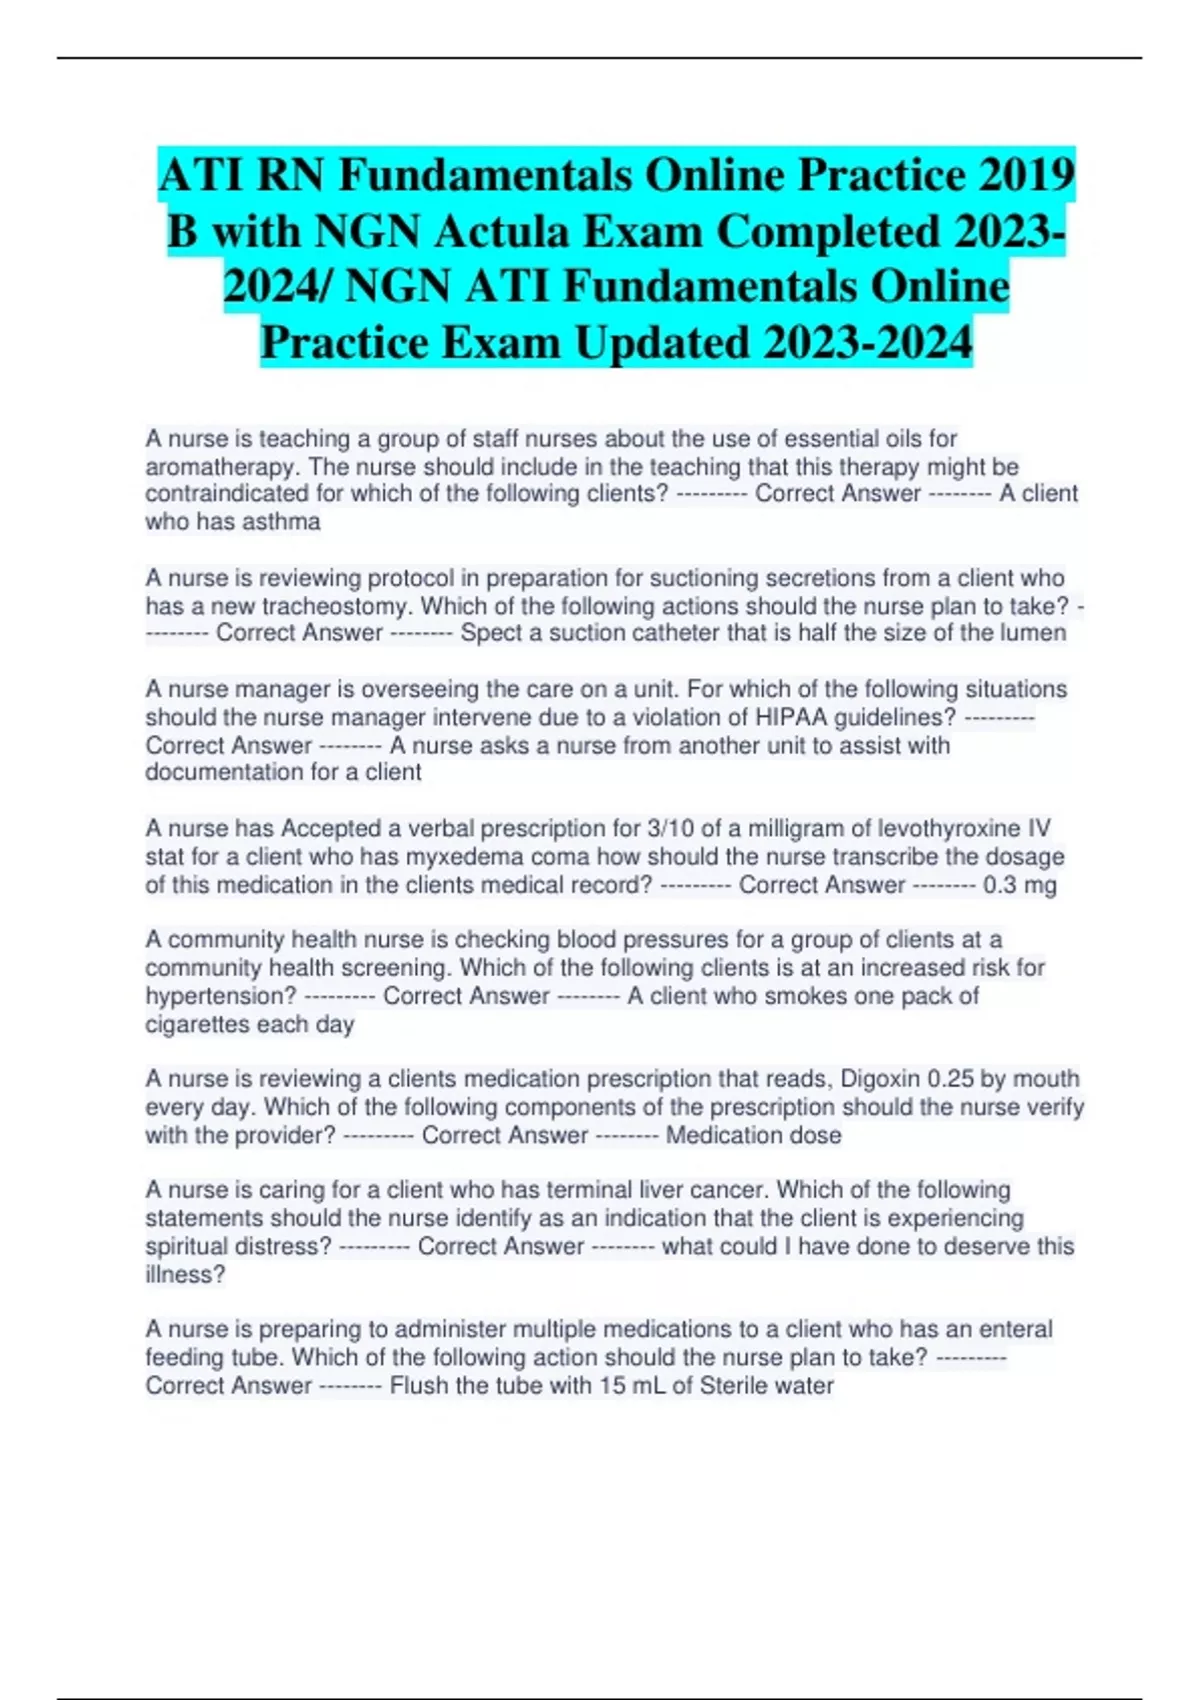 ATI RN Fundamentals Online Practice 2019 B with NGN Actula Exam